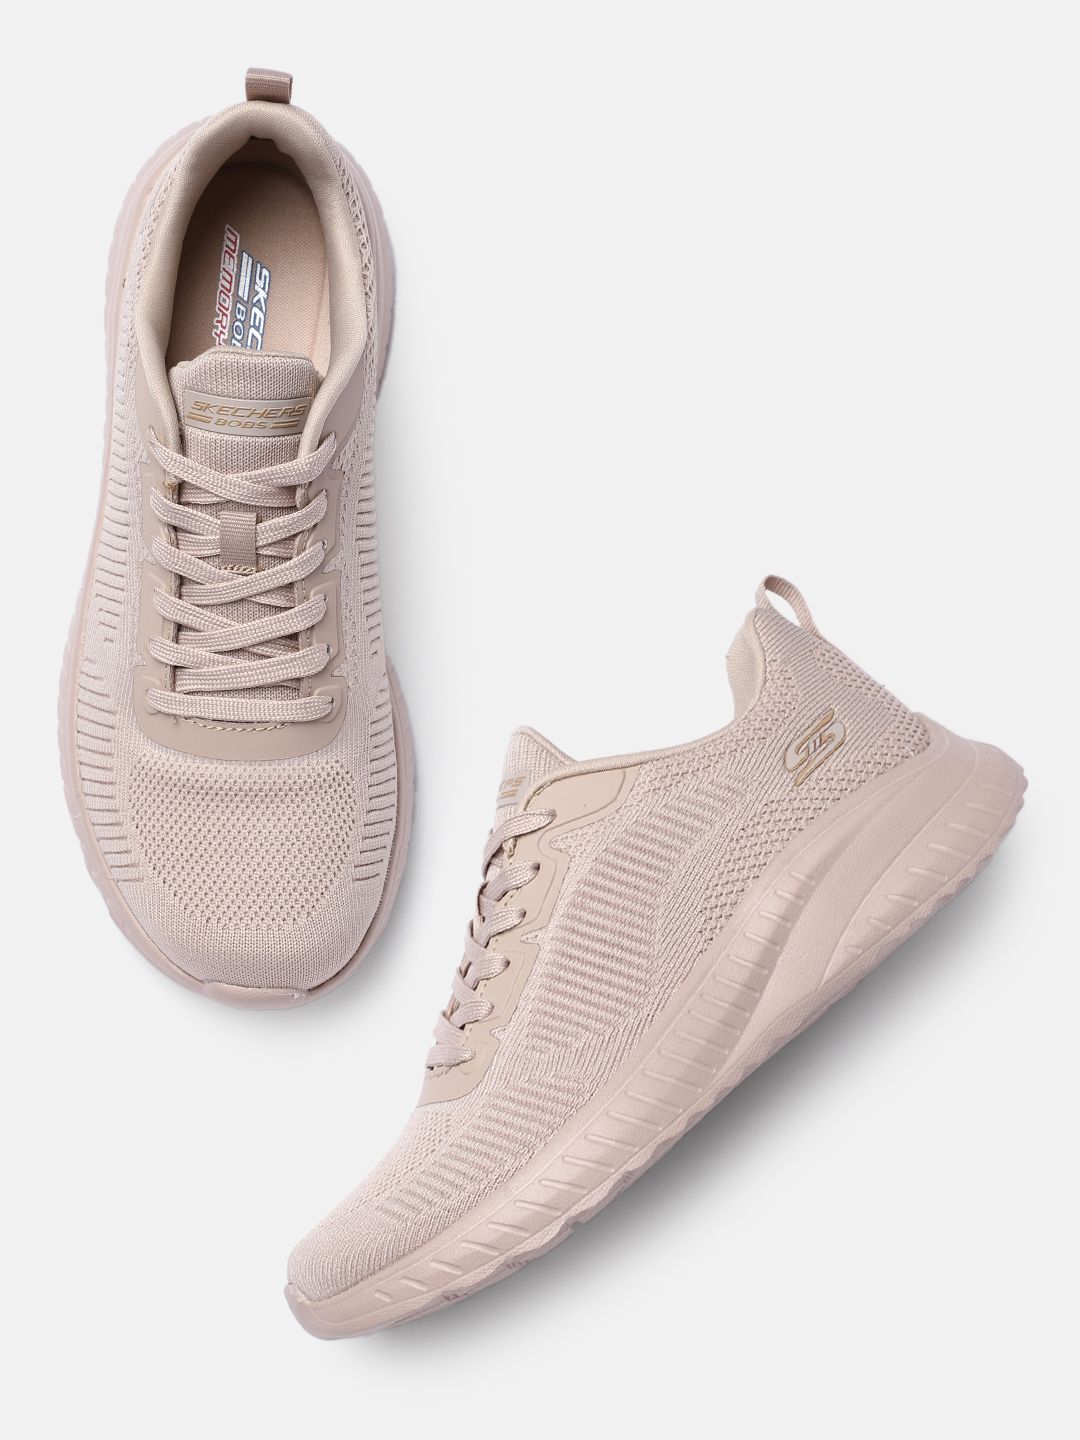 Skechers Women Nude-Coloured BOBS SQUAD CHAOS - FACE OFF Sneakers Price in India